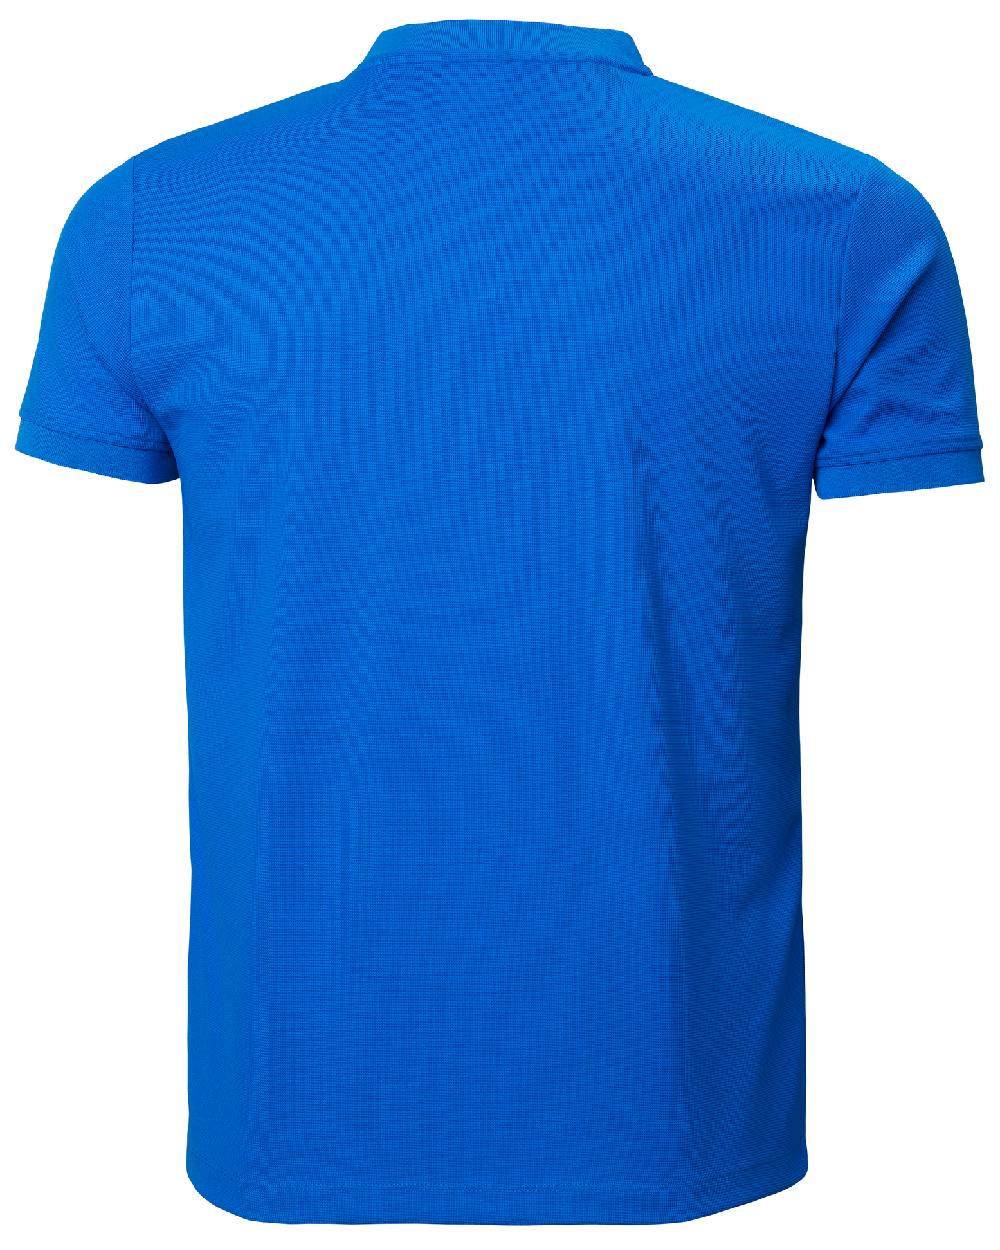 Electric Blue Coloured Helly Hansen Mens HP Sun Protective Tops on white background 